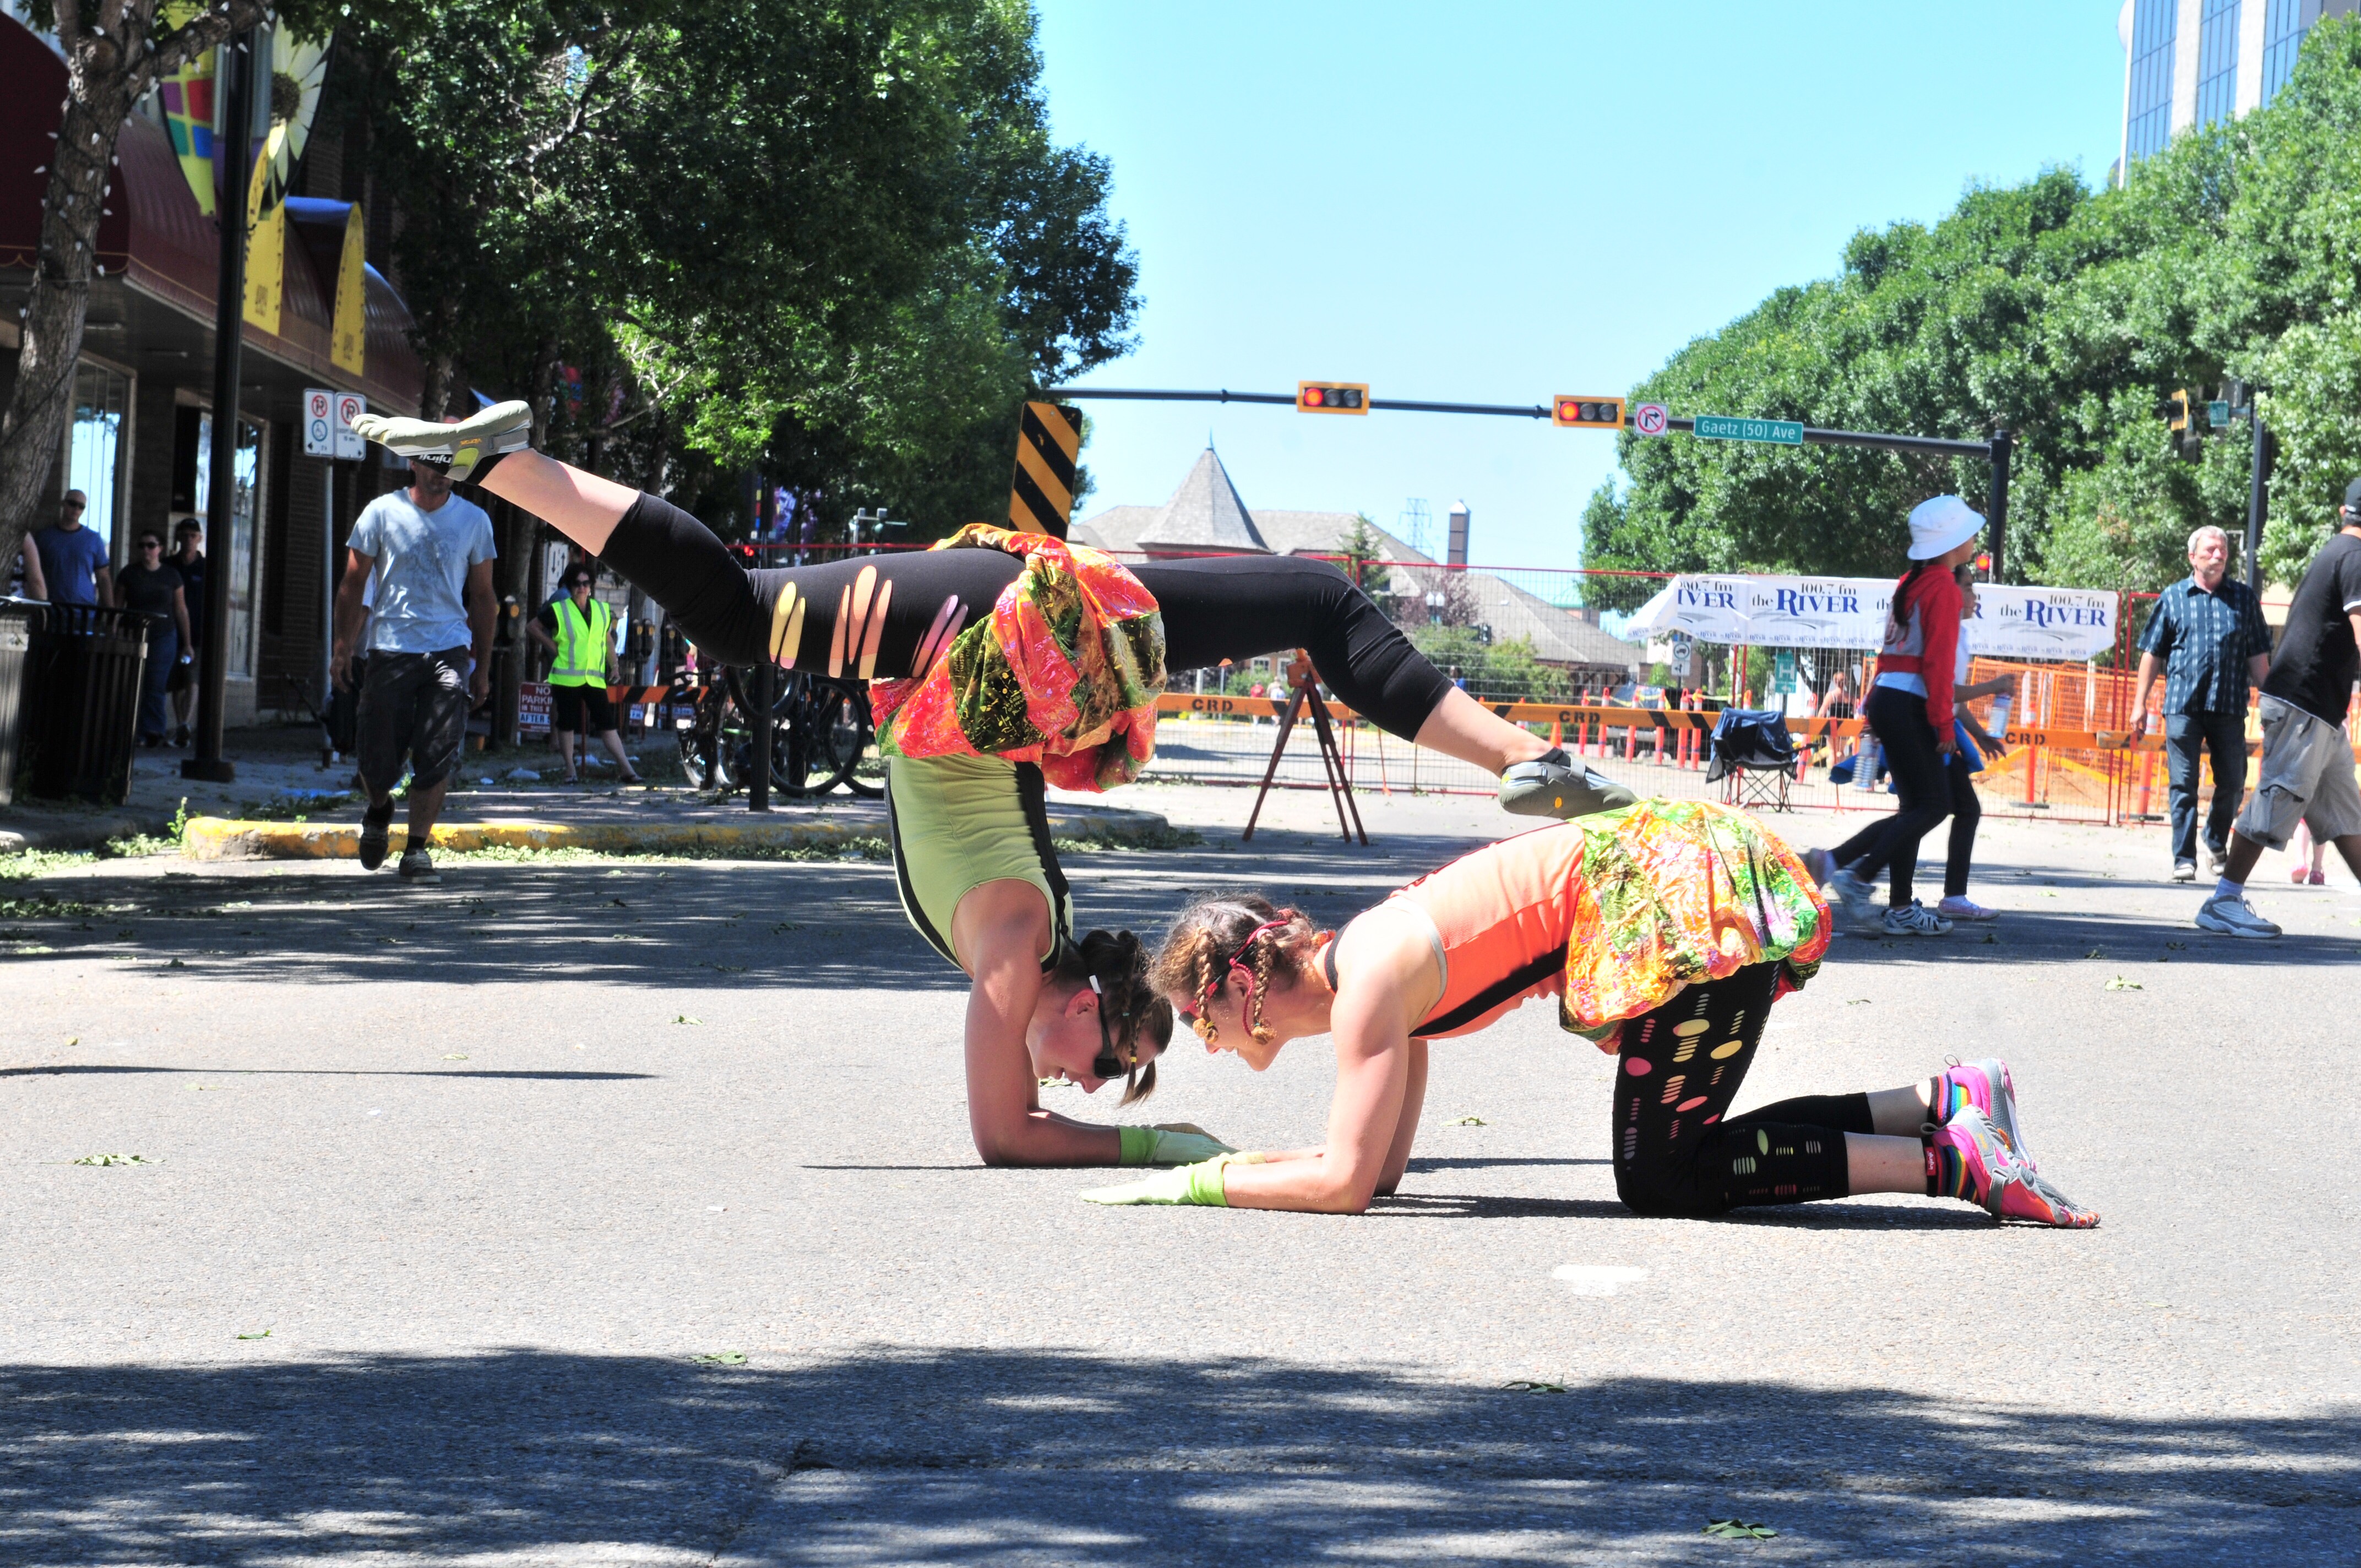 TALENT- Edmonton group Synergy shows off their acrobatic skills at CentreFest this past weekend downtown Red Deer.